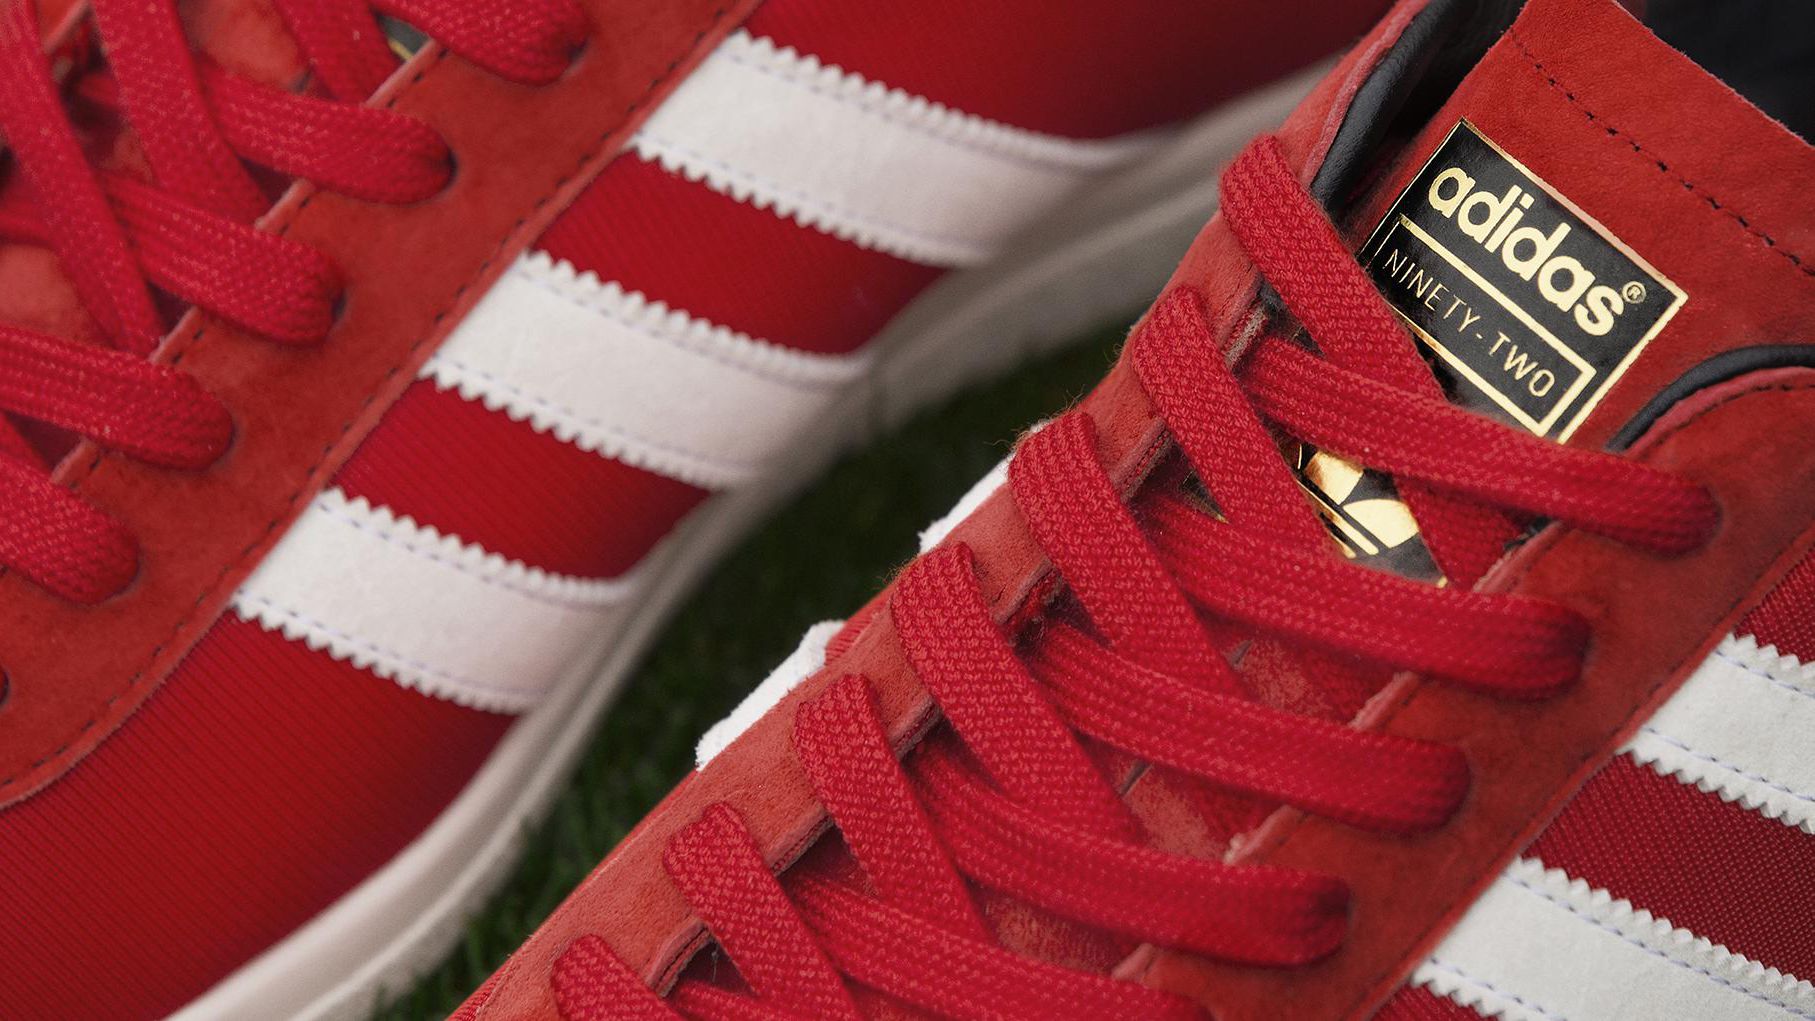 Gallery of adidas Class of 92 trainers 